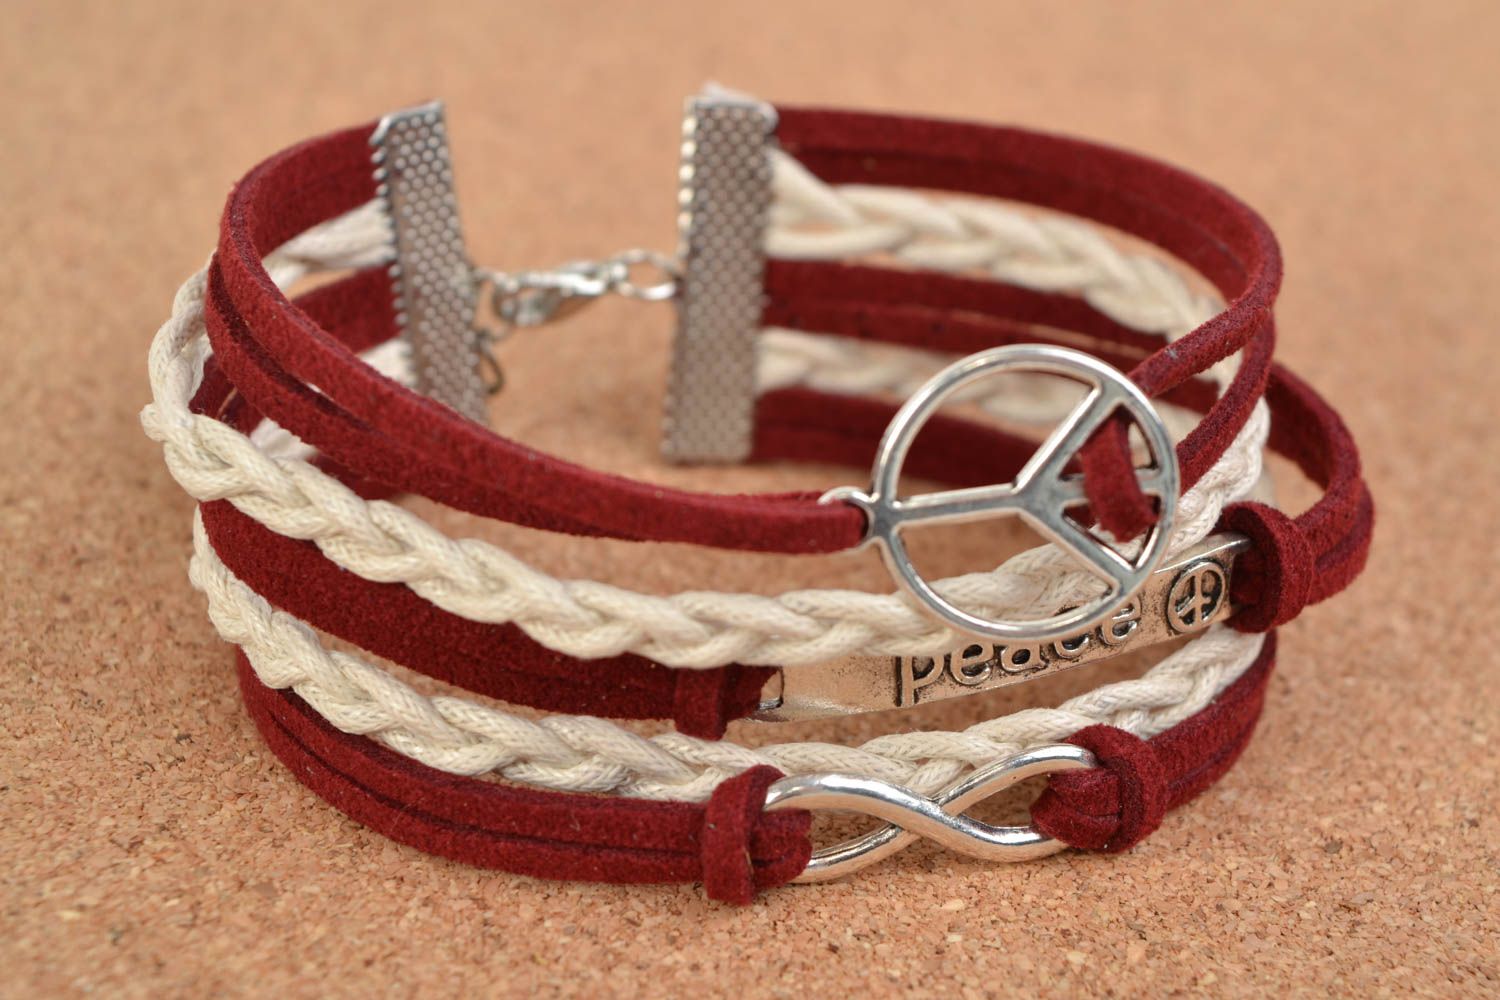 Unusual handmade woven suede bracelet with charms in the shape of various signs photo 1